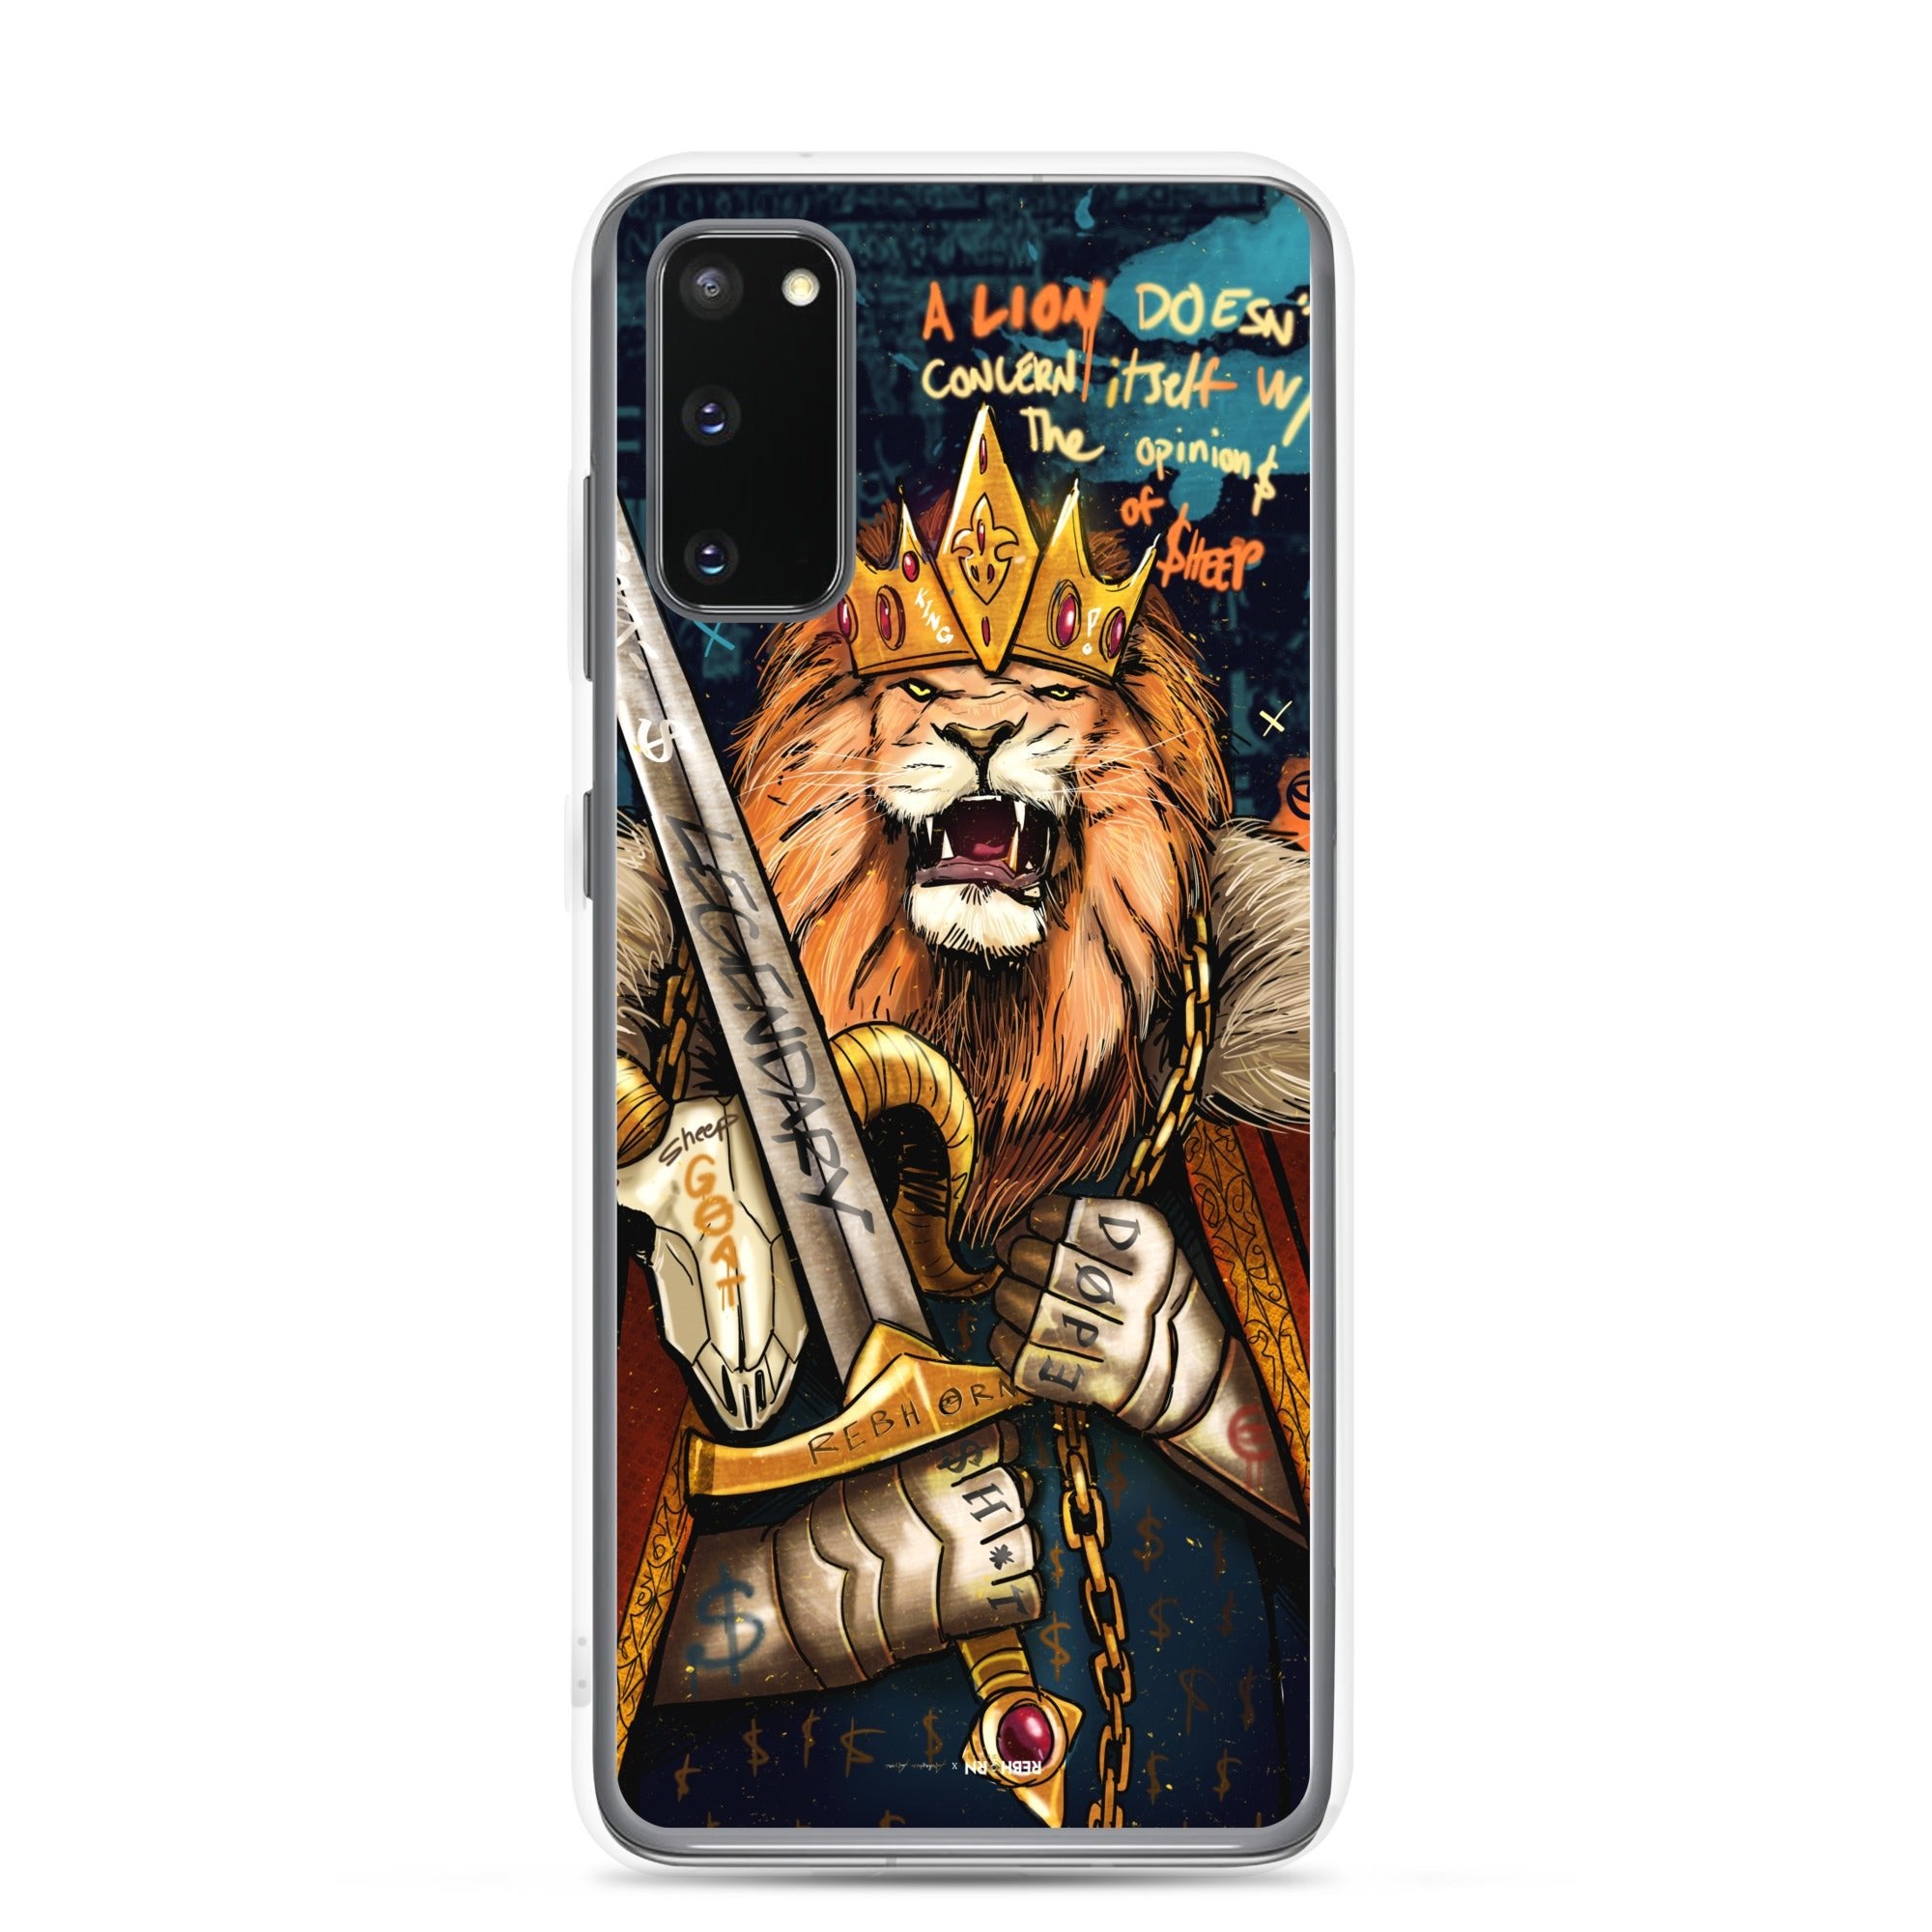 A Lion Doesn't Concern Itself with the Opinions of Sheep Samsung Case - REBHORN DESIGN